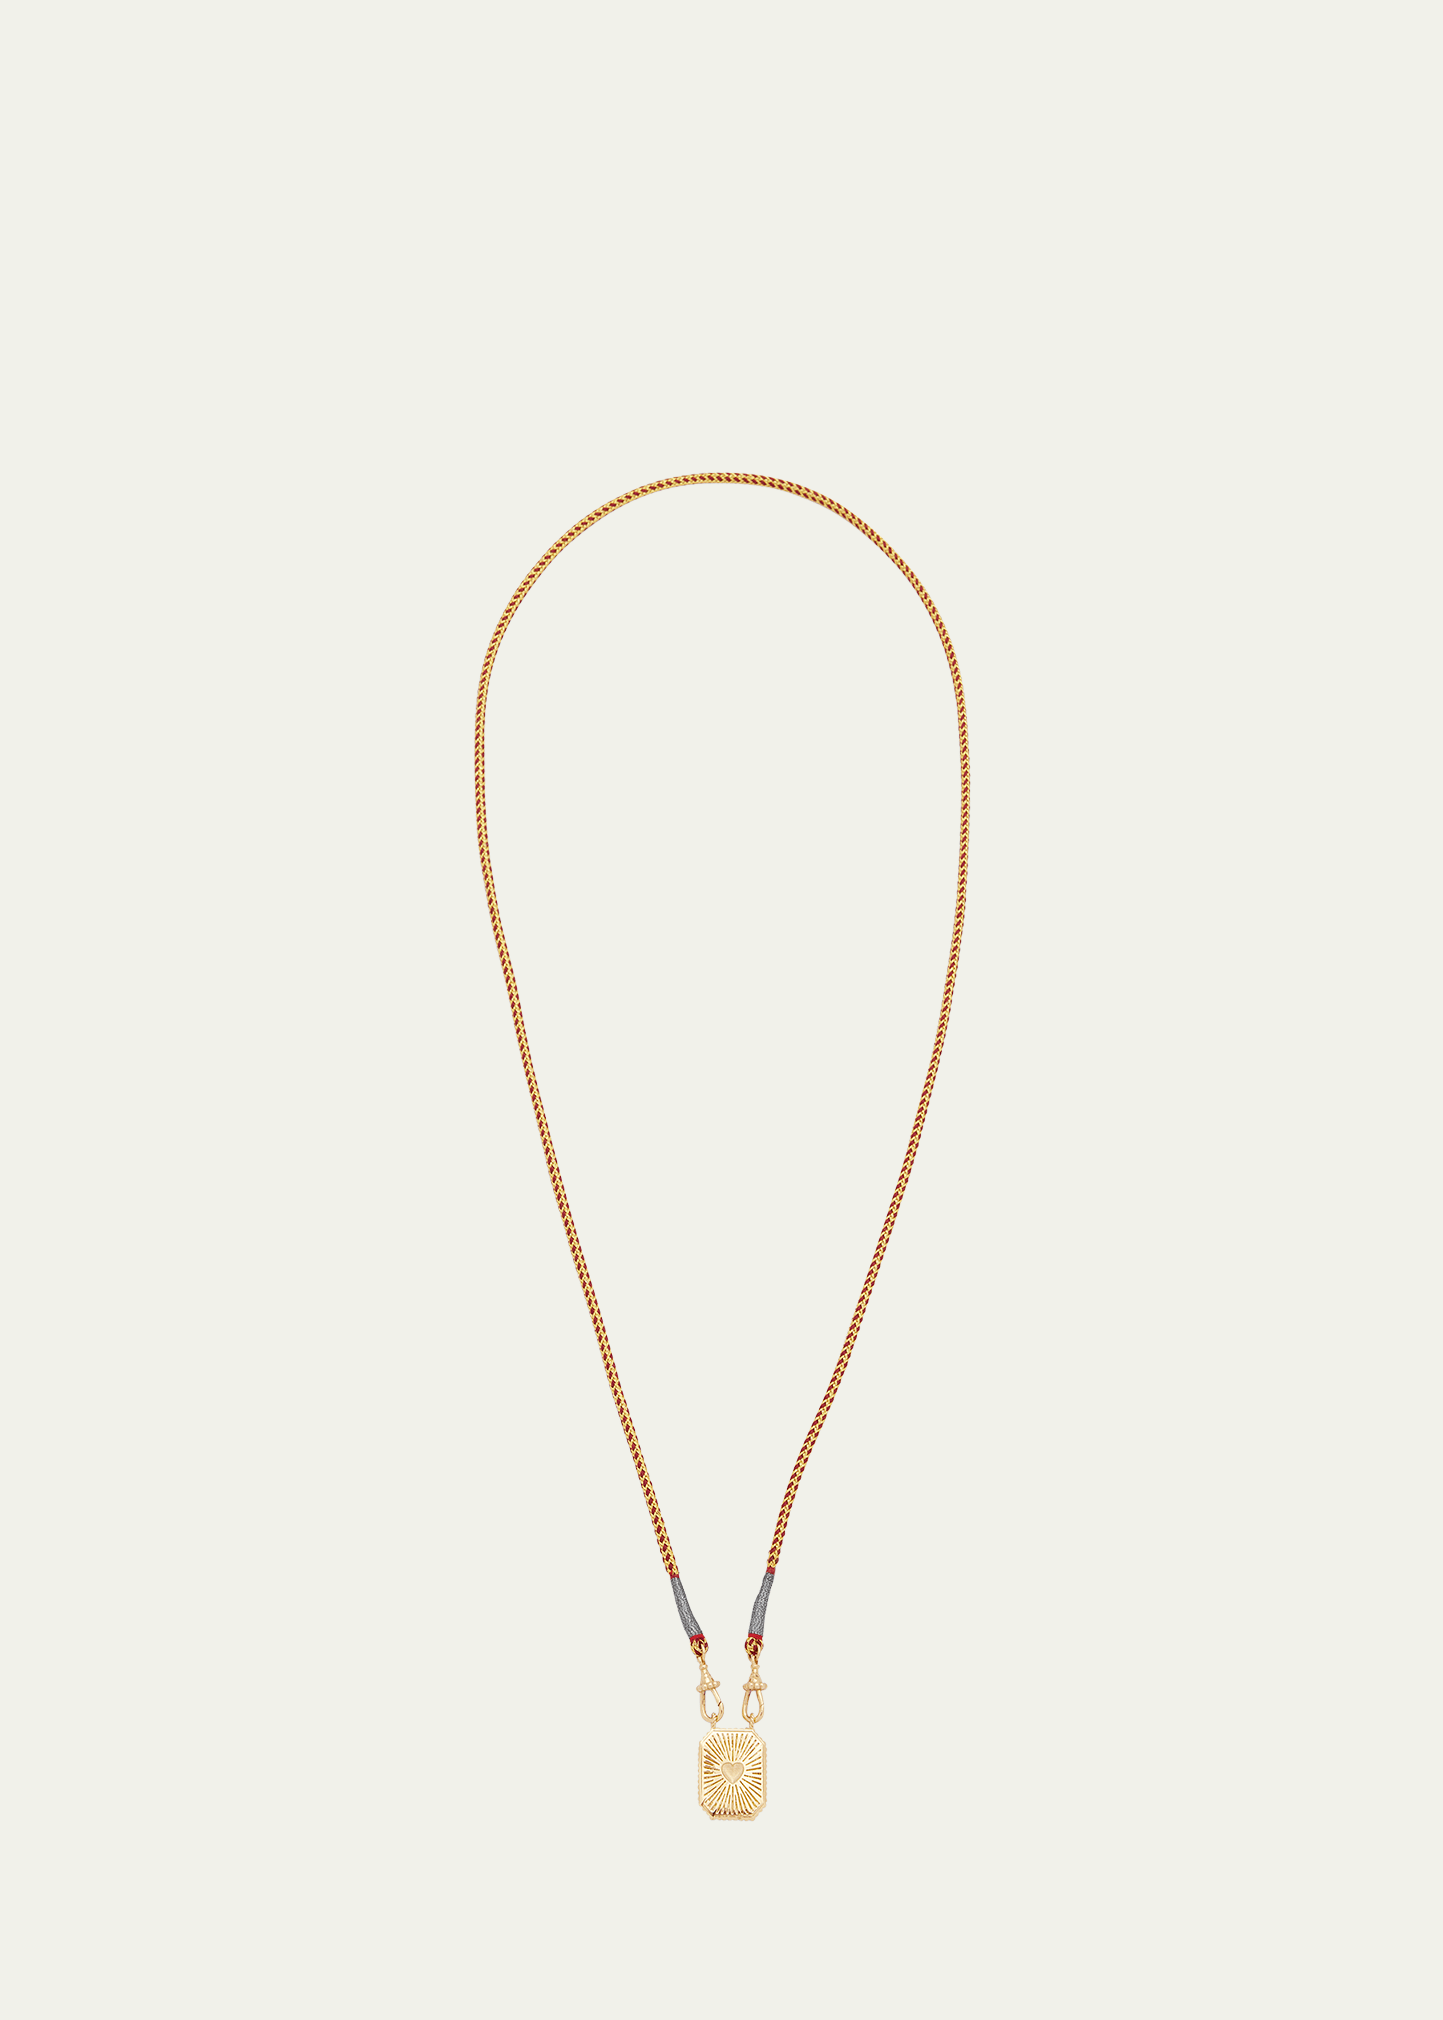 18k Yellow Gold Pendant Wrap Cord Necklace